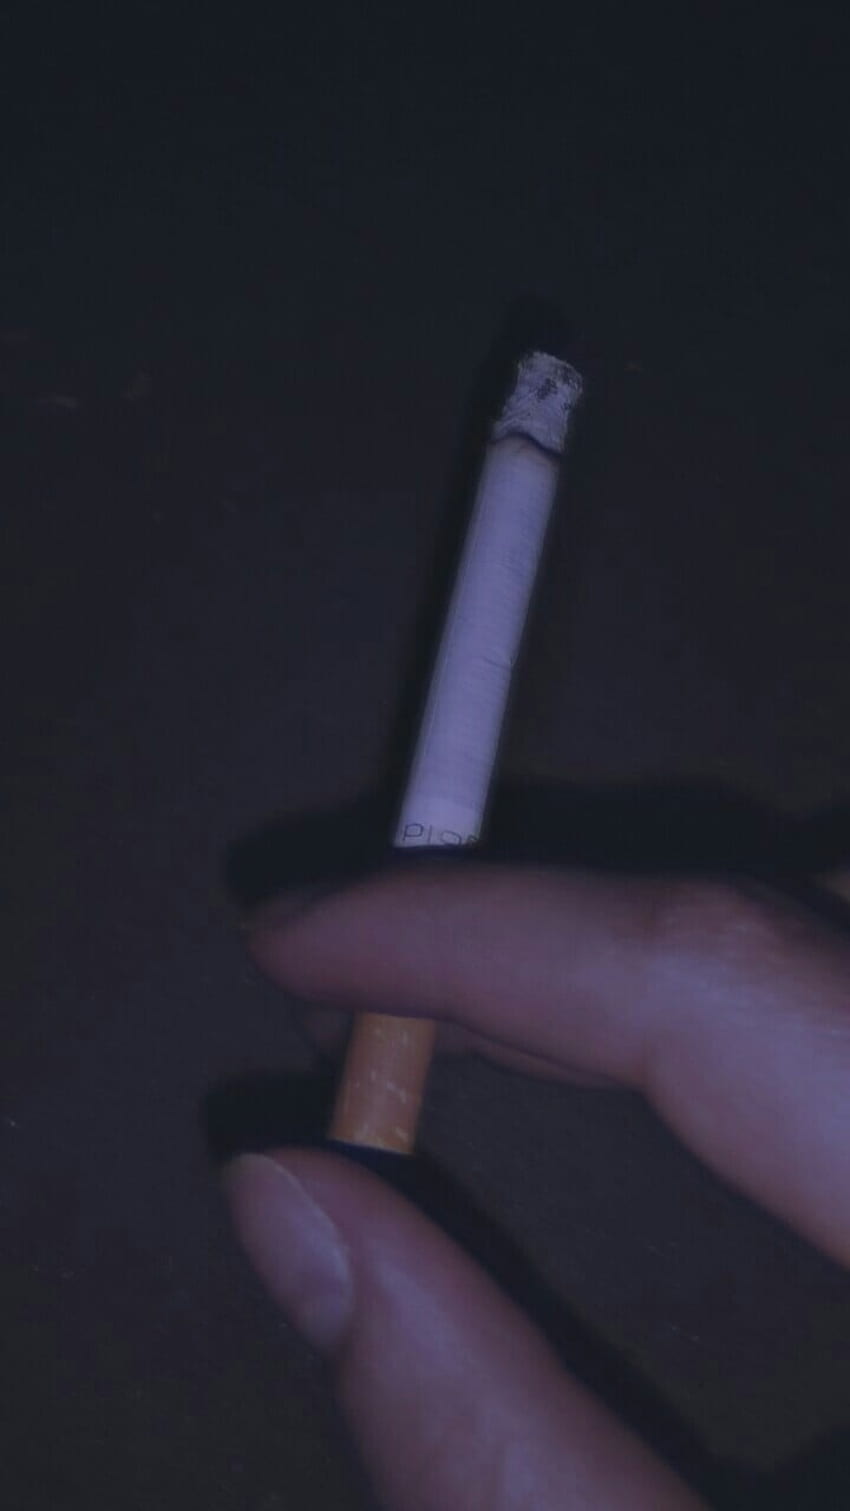 A hand holding a lit cigarette in the dark. - Smoke